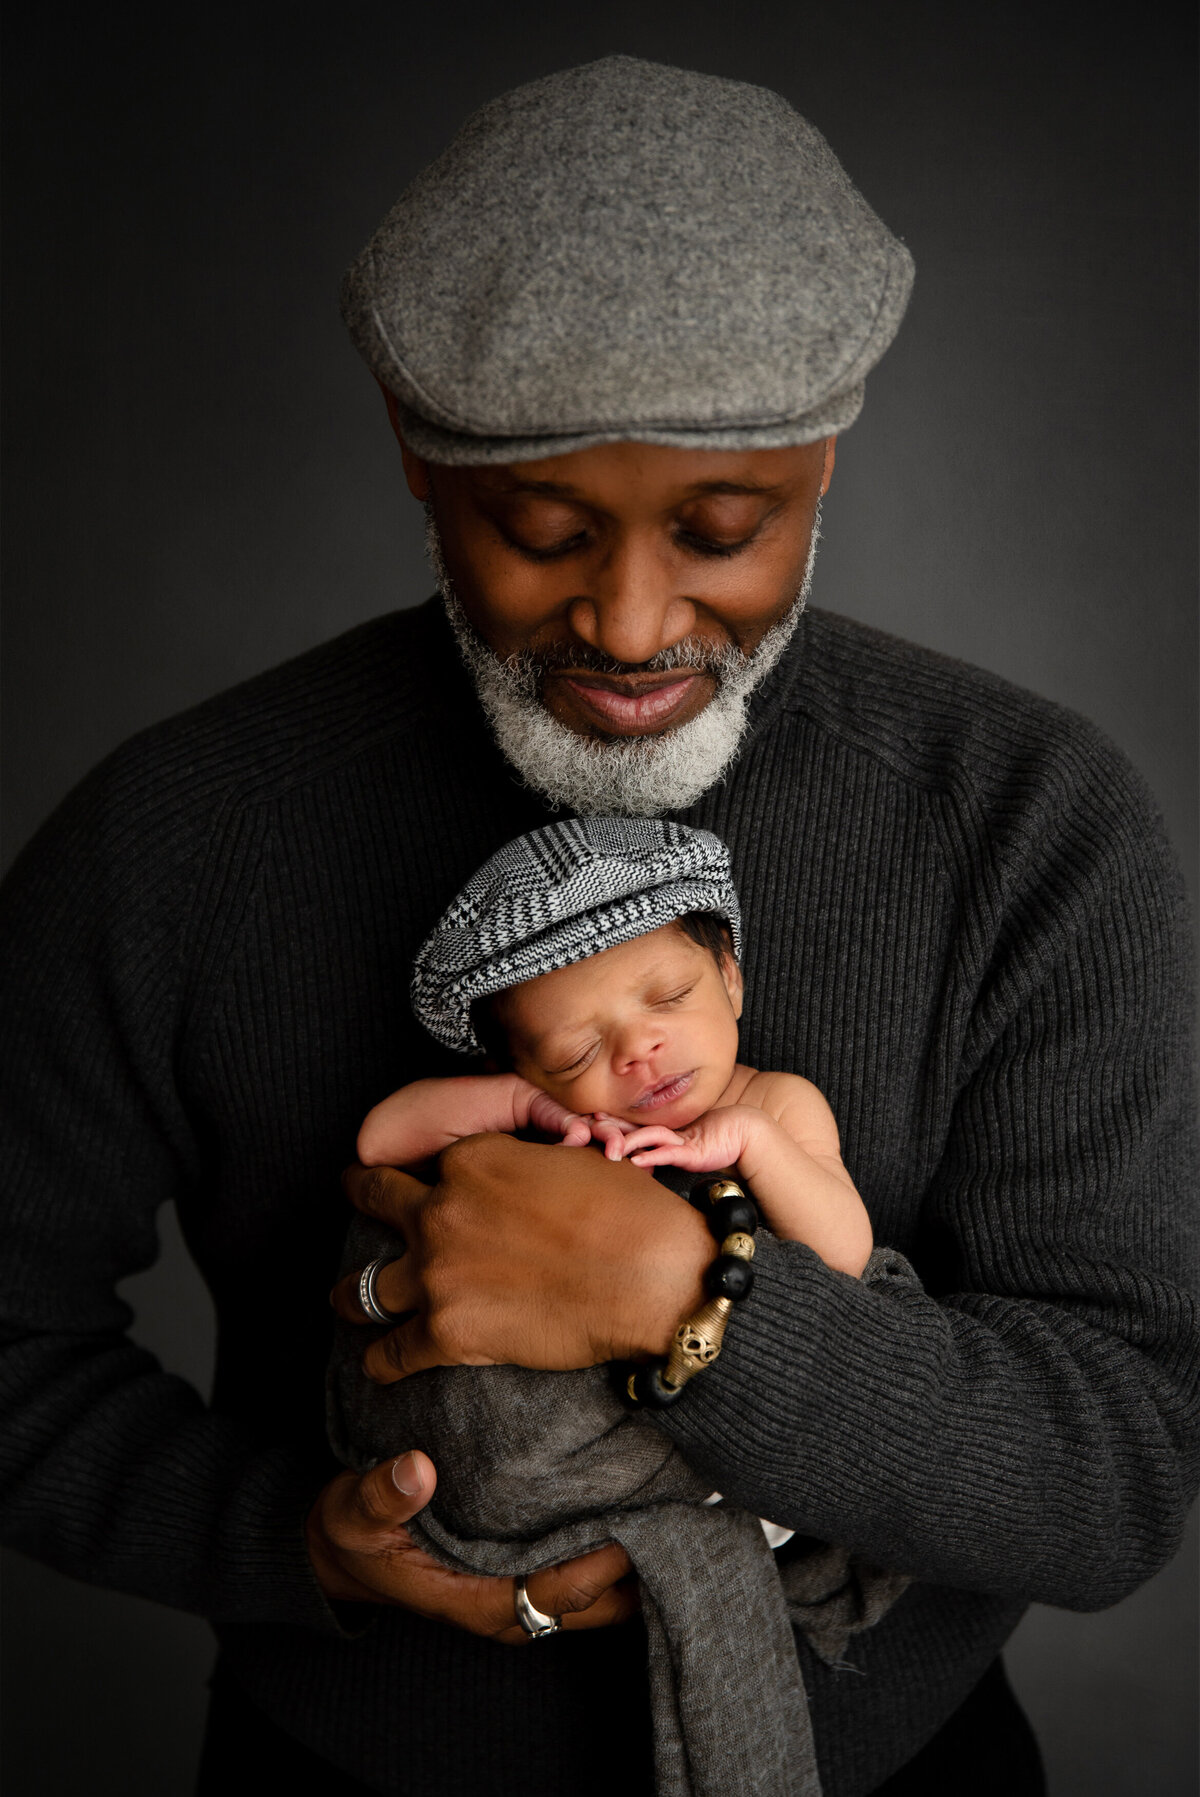 st-louis-newborn-photographer-father-with-beard-holding-newborn-baby-wearing-matching-flatcap-hats-in-gray-varient-color-scheme